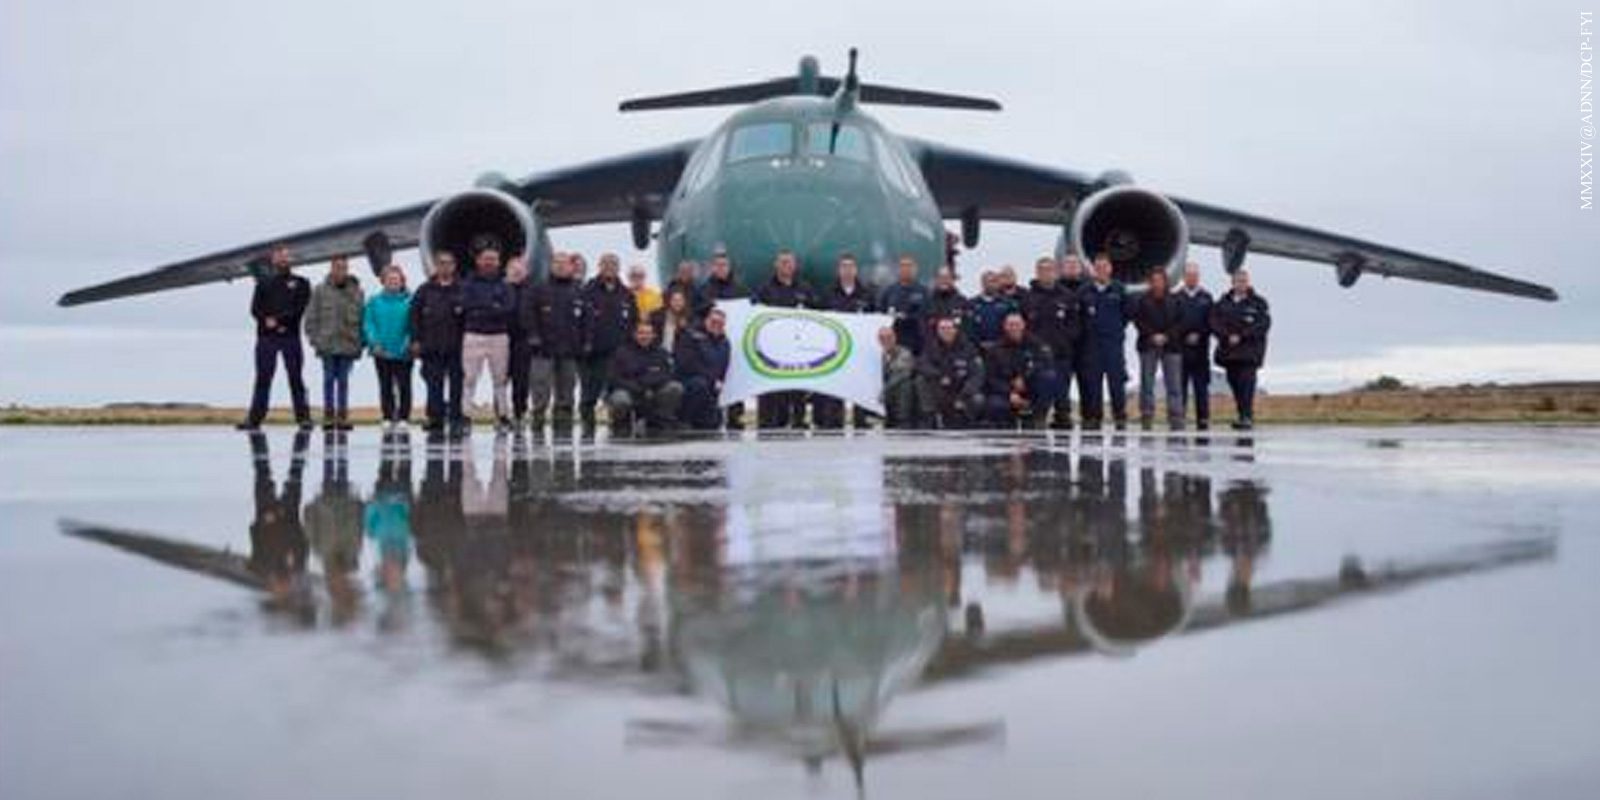 1st Troop Transport Group provides logistical support to the Brazilian Antarctic Program